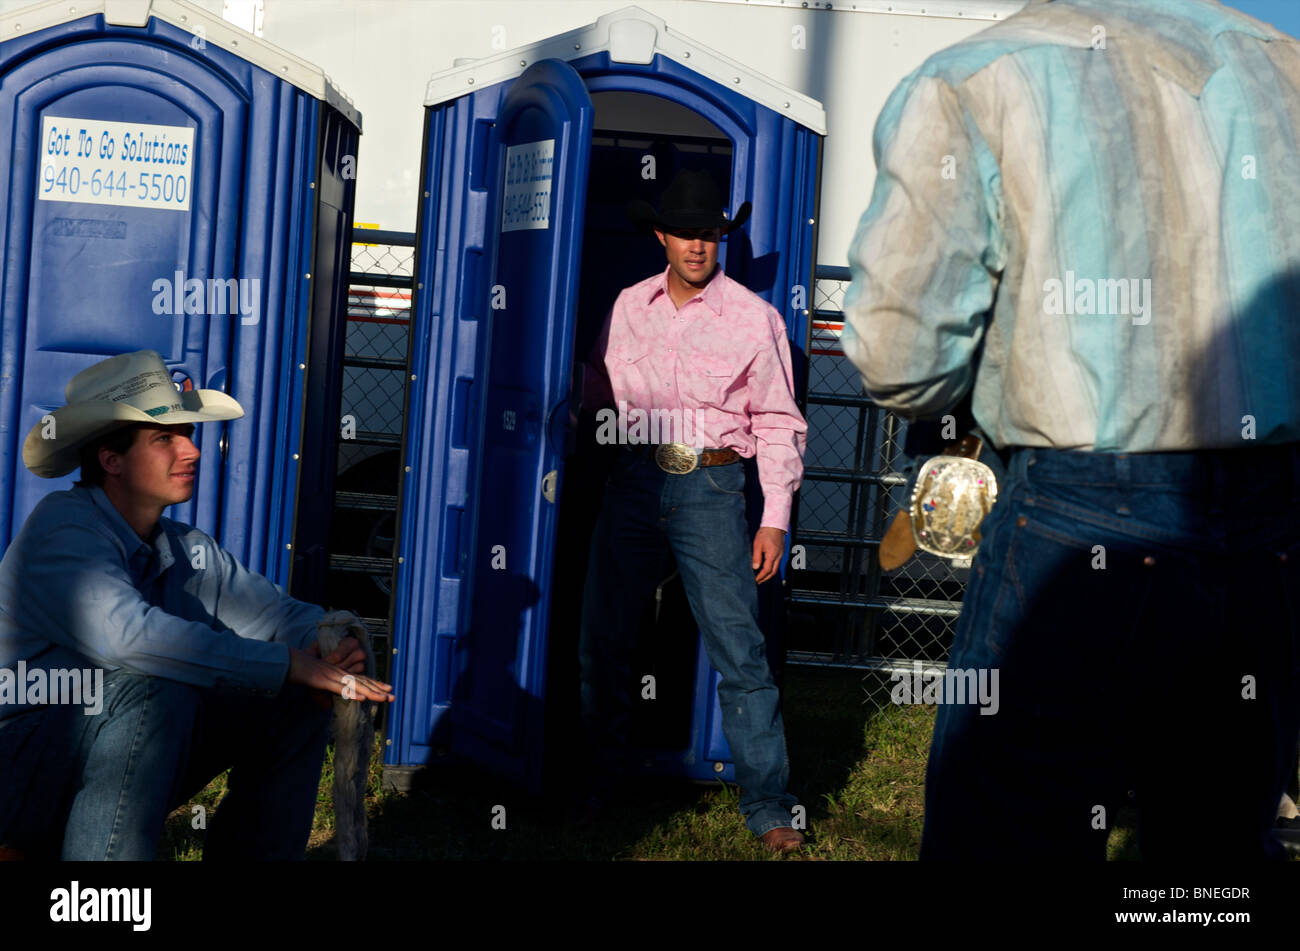 Cowboy members of PRCA at rodeo event in Bridgeport, Texas, USA Stock Photo